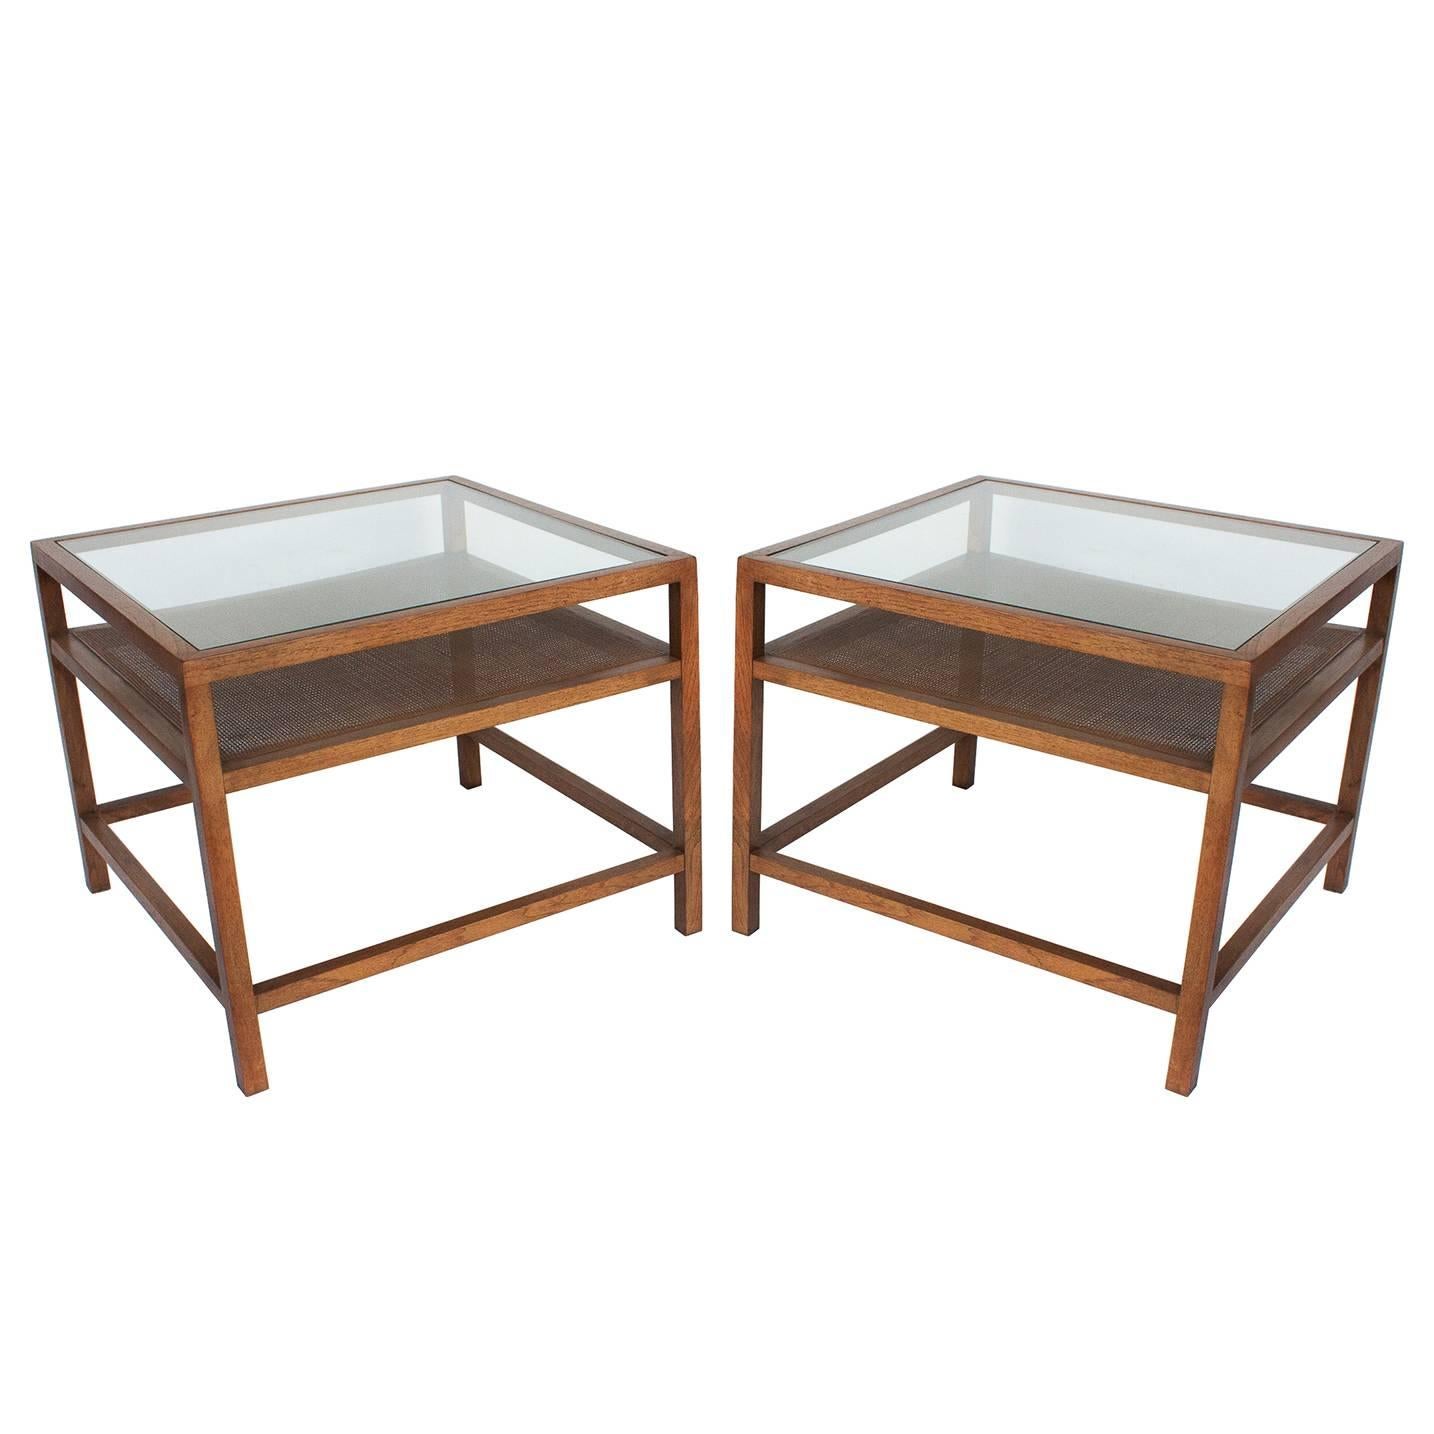 Pair of Square End Tables with Cane Shelf